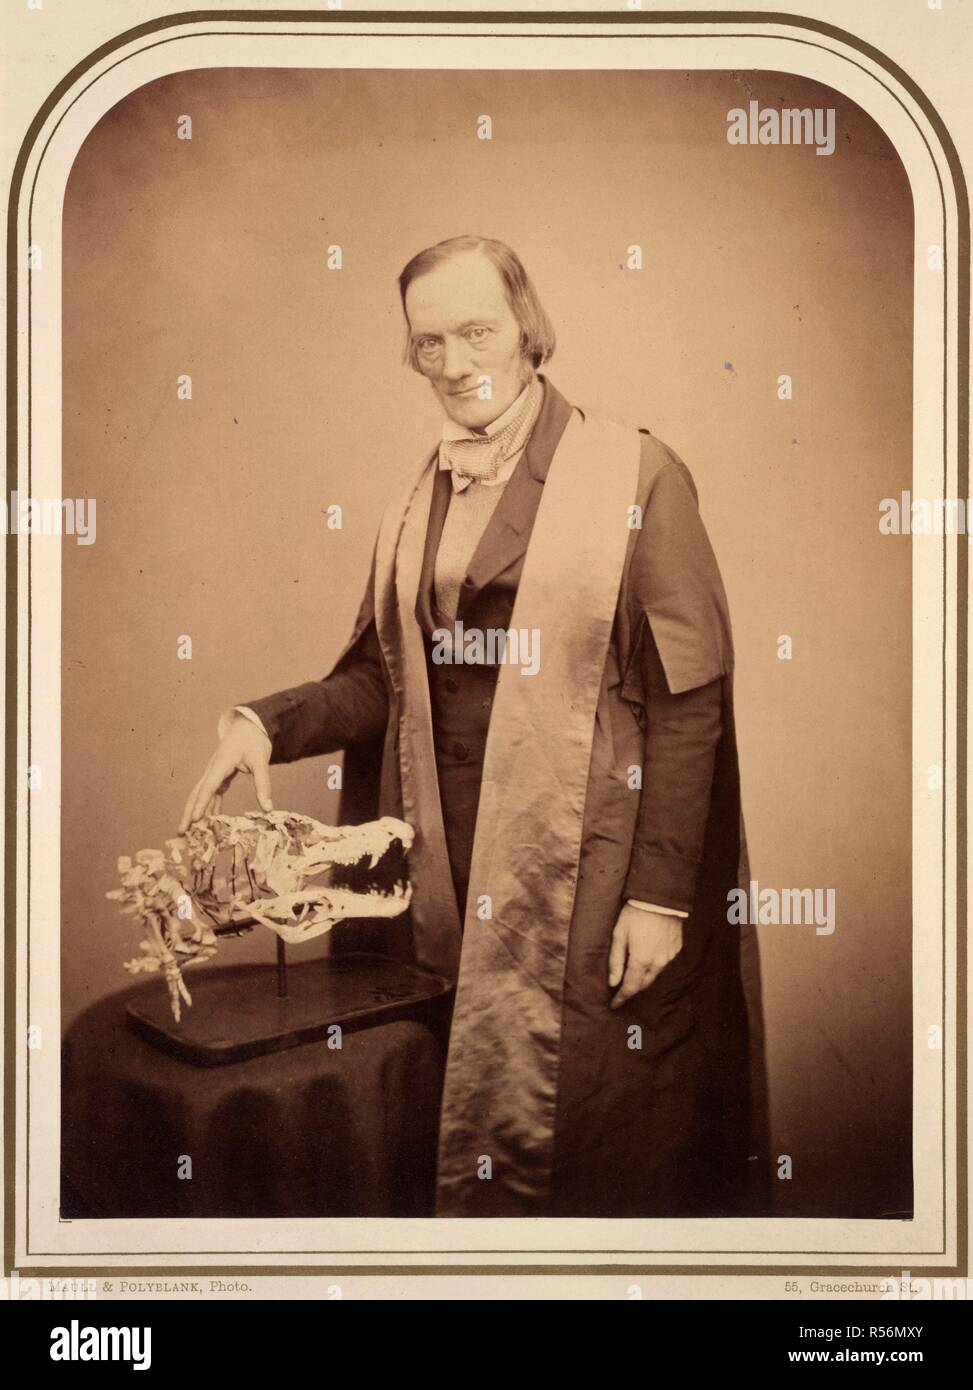 Professor Owen, F.R.S. Photographic Portraits of Living Celebrities execu. London, 1856-1859. Sir Richard Owen (1804-1892). Portrait. English Zoologist and Palaeontologist. He coined the term 'Dinosaur' ('terrible lizard').  Image taken from Photographic Portraits of Living Celebrities executed by Maull and Polyblank; with biographical notices by E. W. [and others]. Vol. 1.  Originally published/produced in London, 1856-1859. . Source: 10804.f.6, plate I. Language: English. Stock Photo